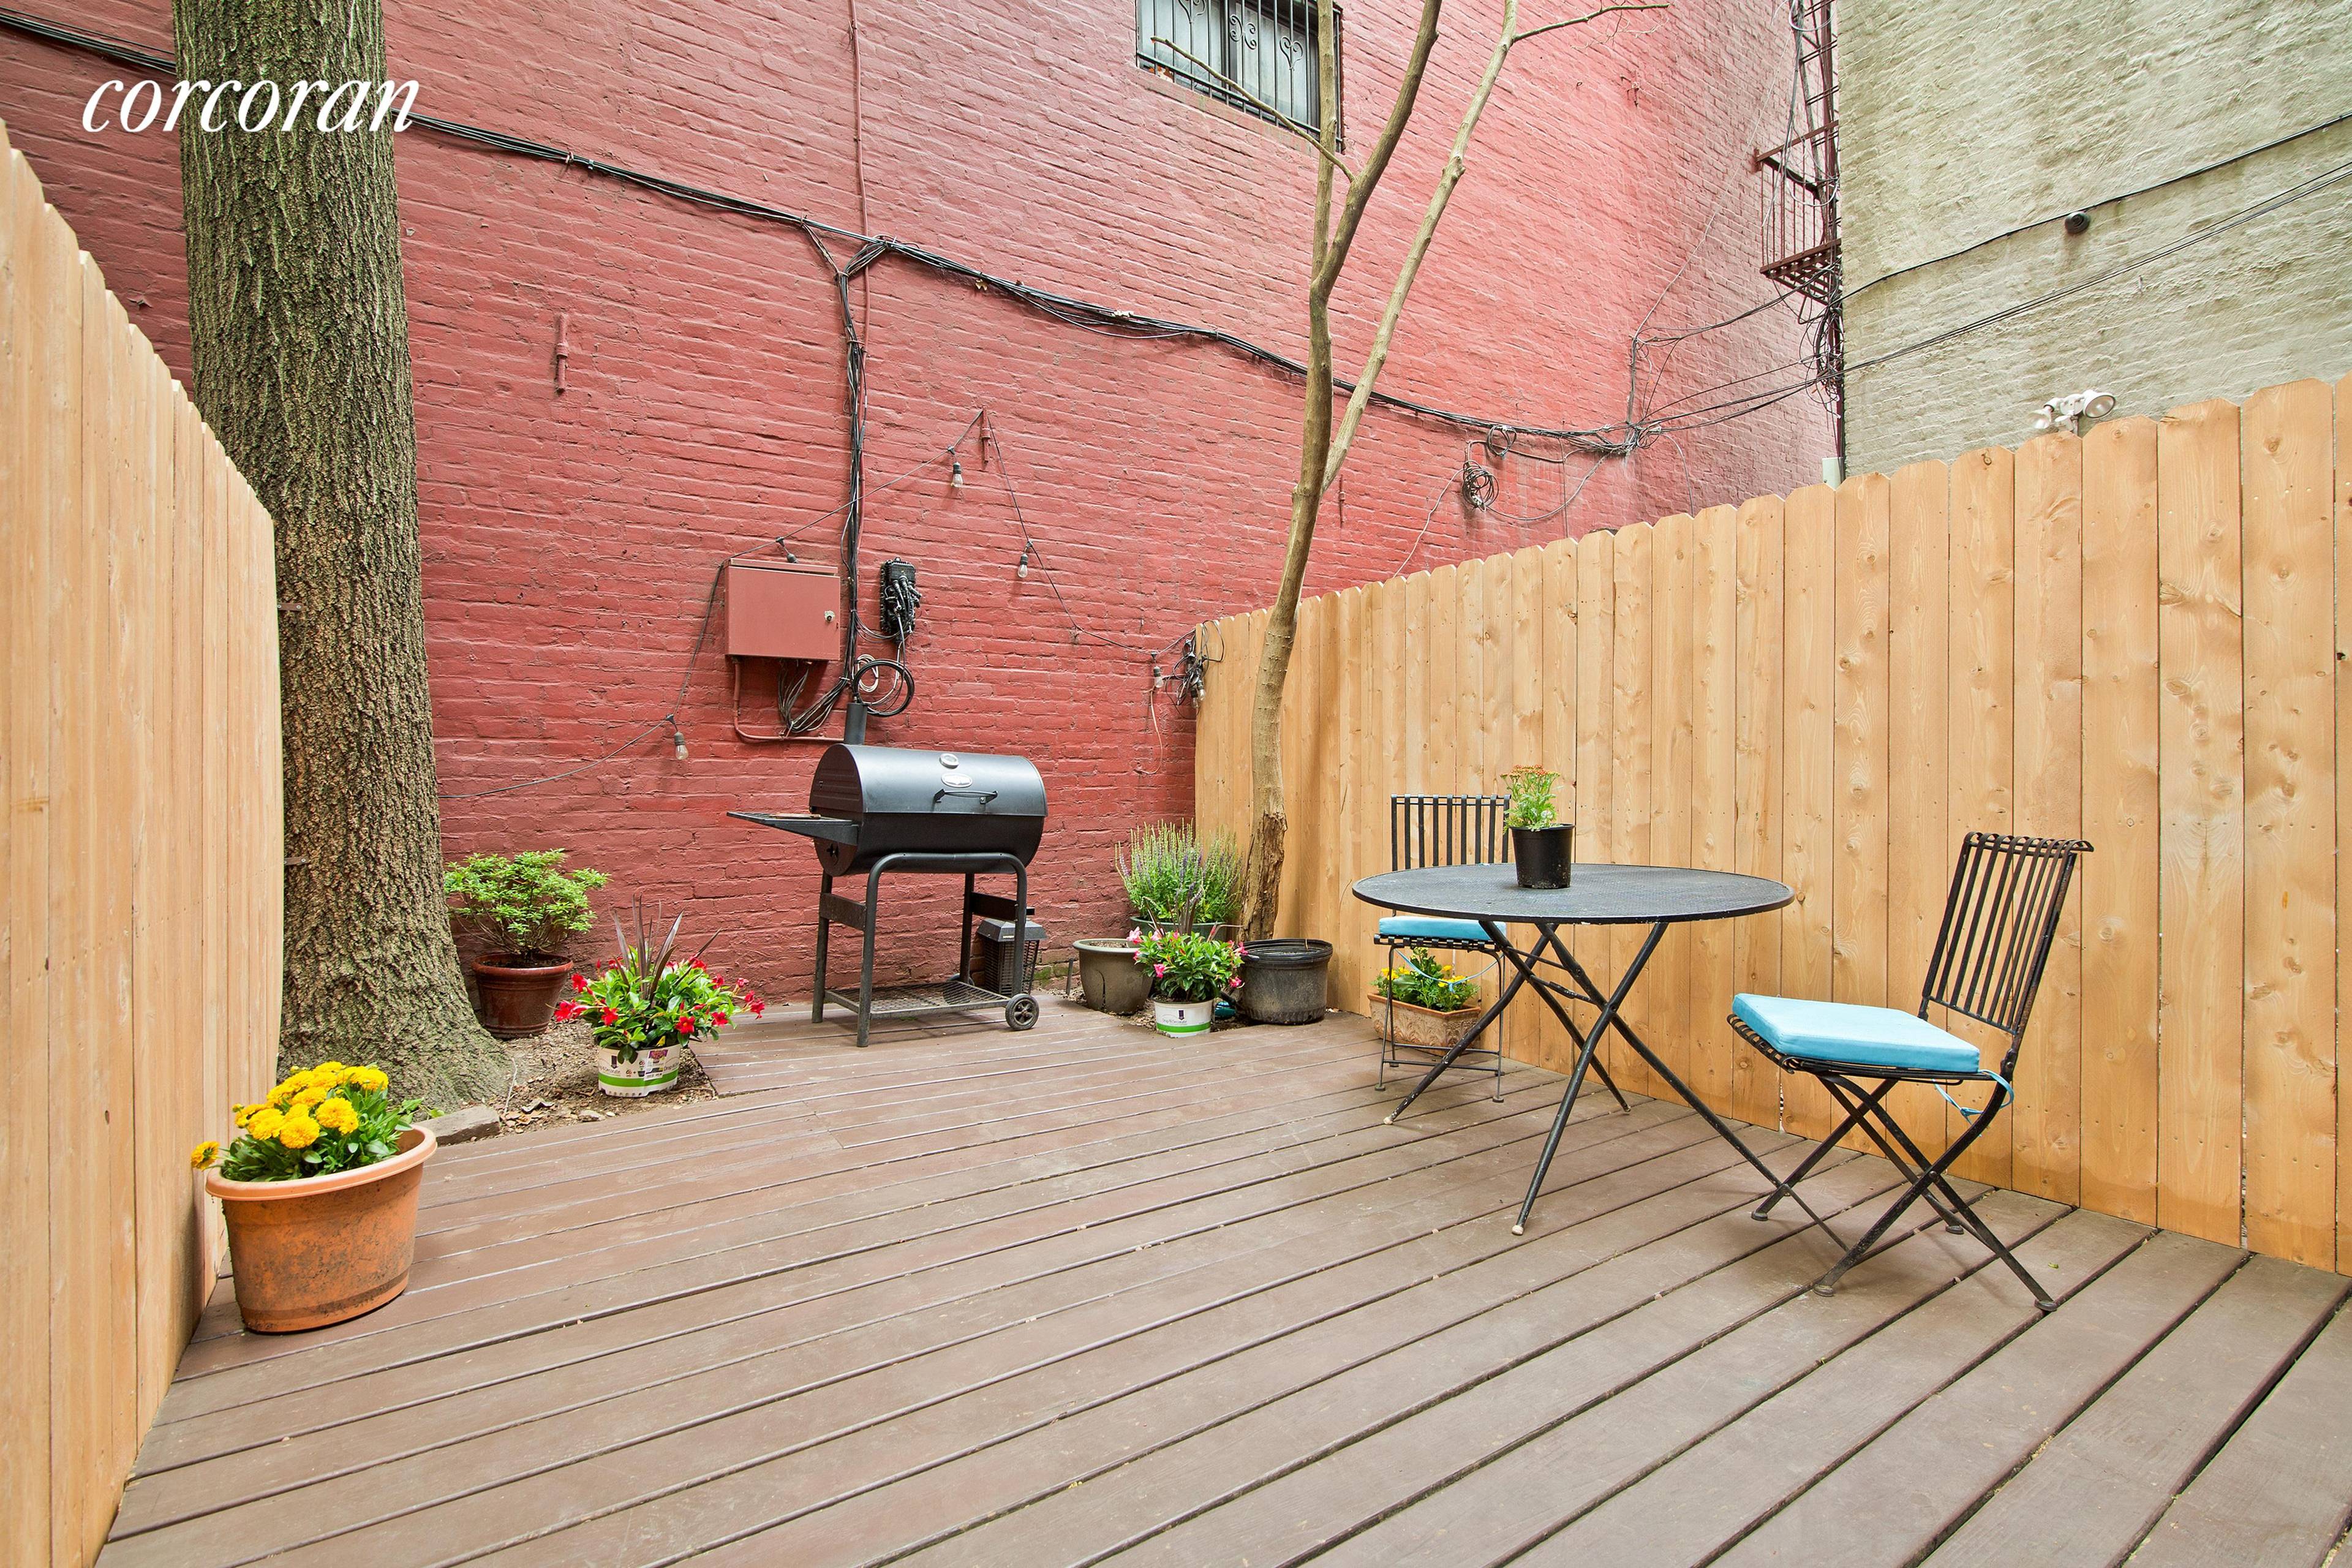 With a peaceful private garden for you to enjoy your favorite cocktails, this charming two bedroom home has an efficient layout.